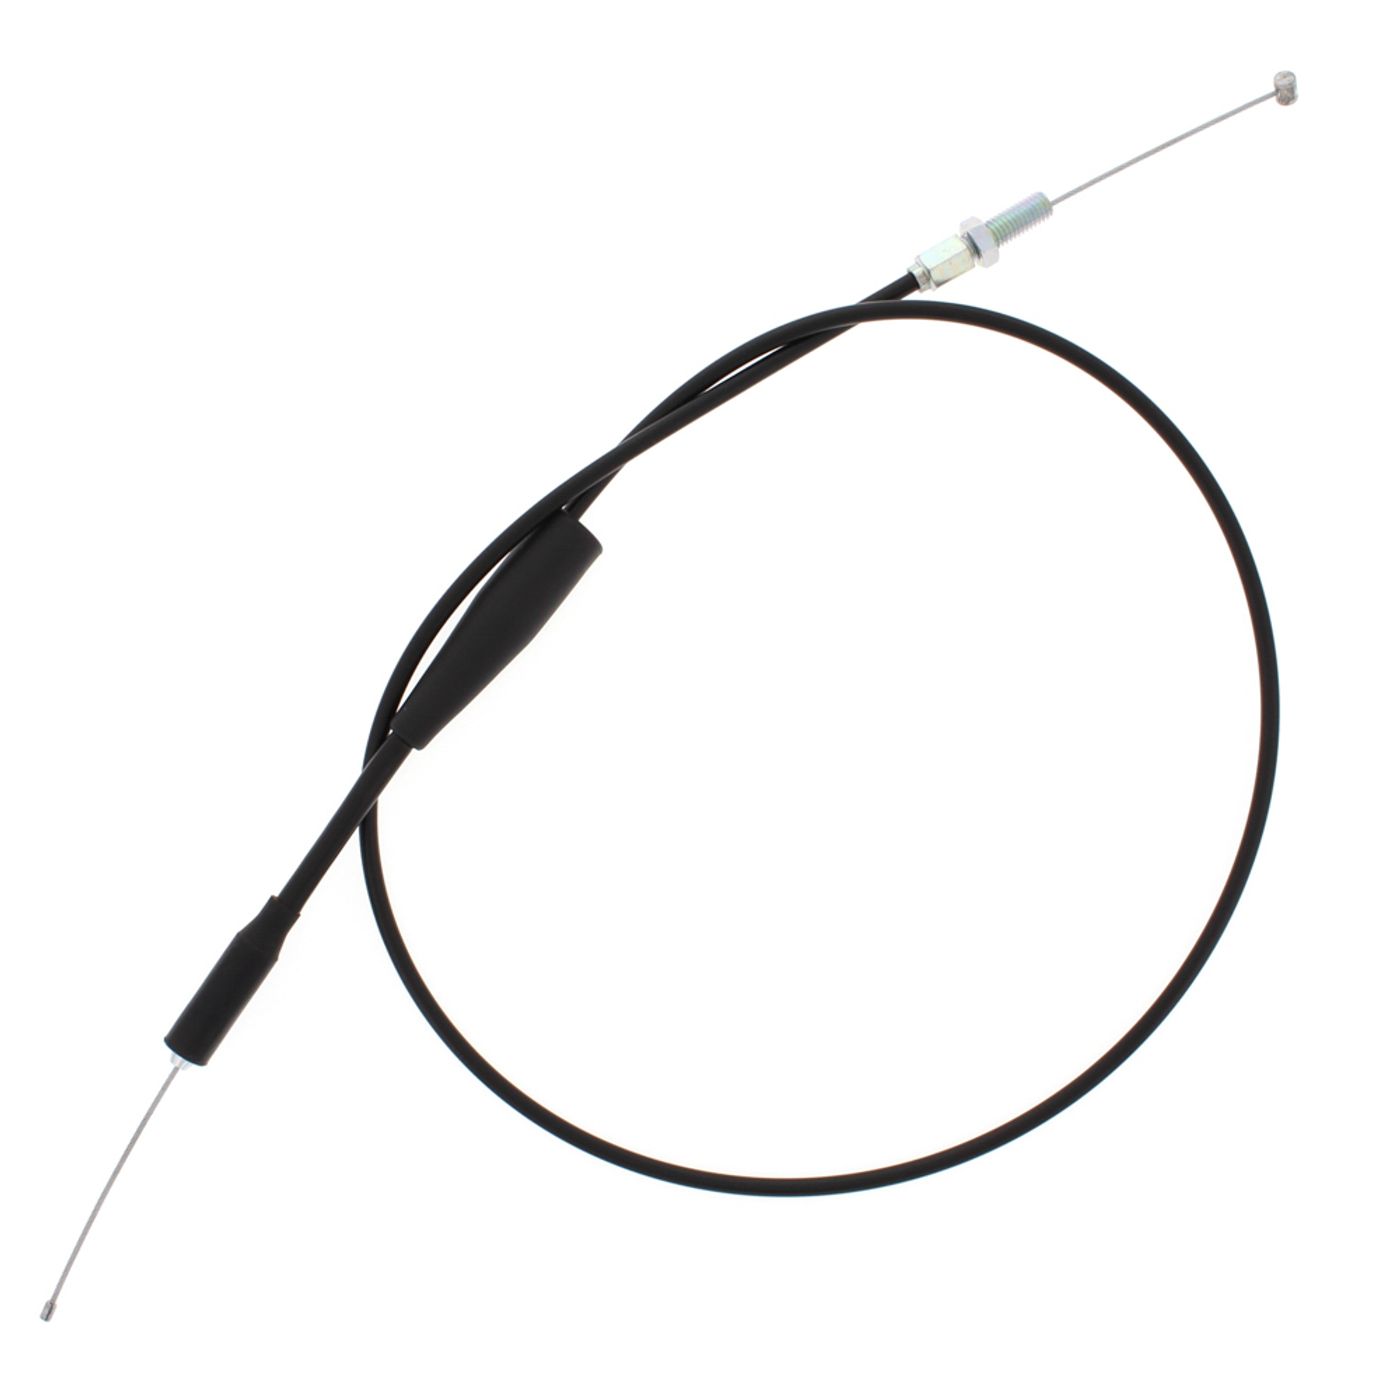 Wrp Throttle Cables - WRP451040 image